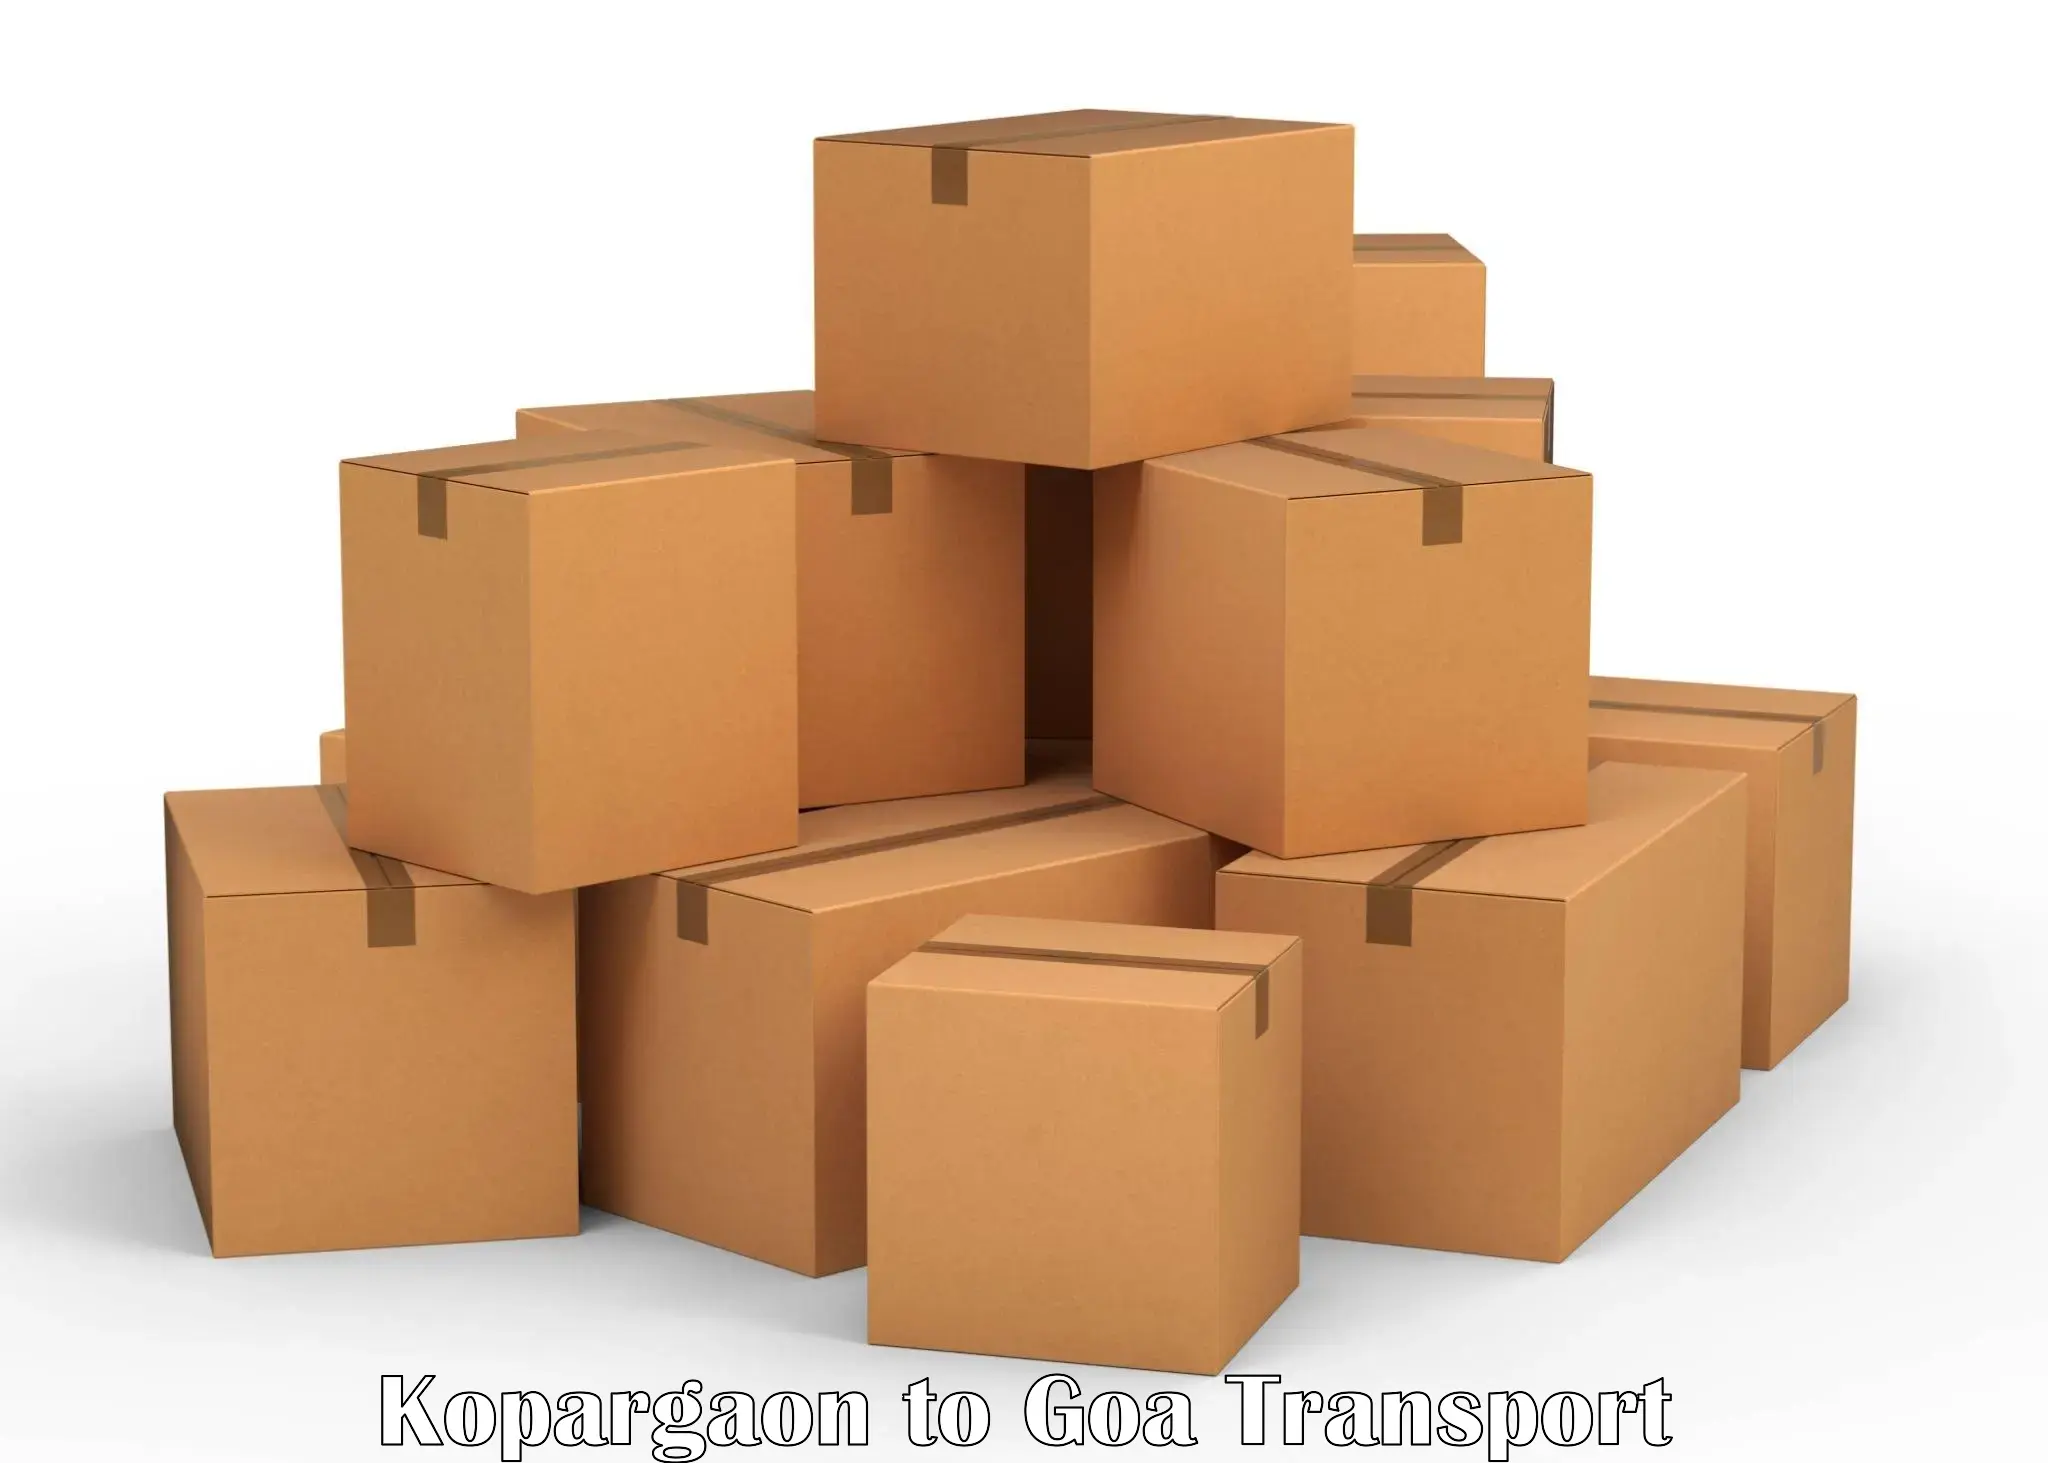 Goods delivery service Kopargaon to Margao